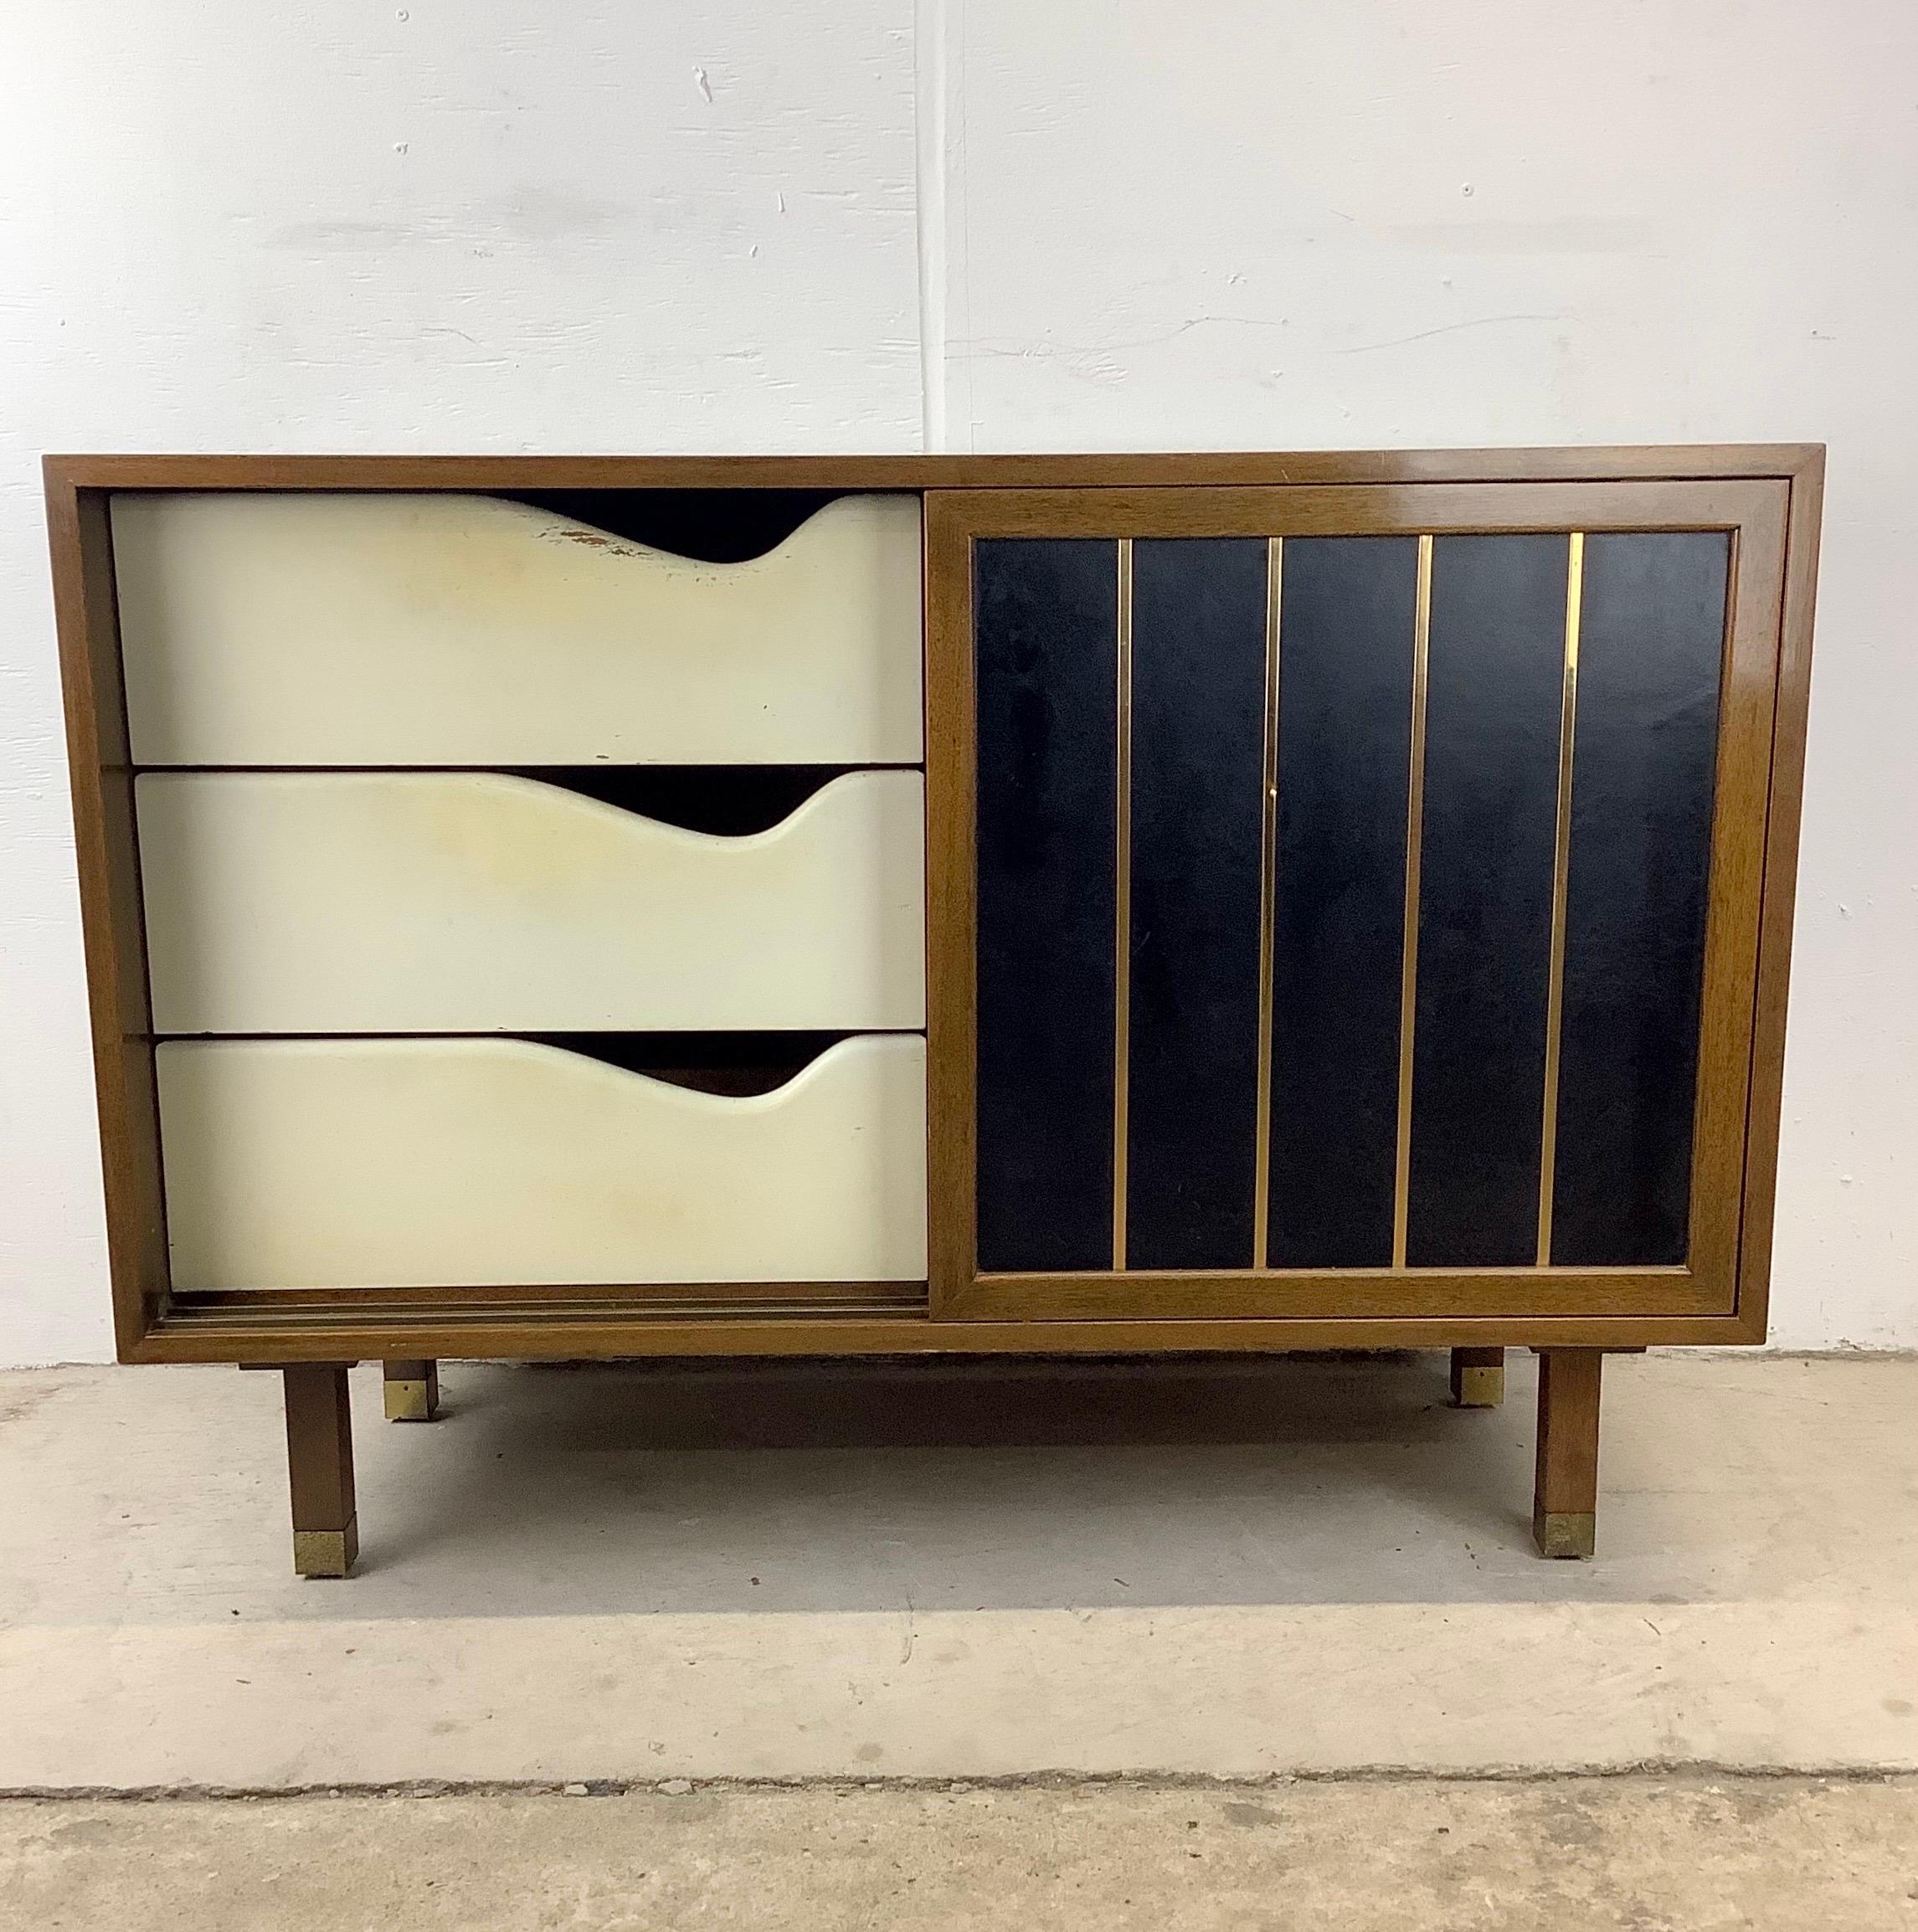 This handsome Mid-Century Modern cabinet from Harvey Probber features fabric wrapped sliding doors concealing side-by-side shelved storage and wide lacquered drawers. The versatile mix of interior storage make this the perfect storage cabinet for